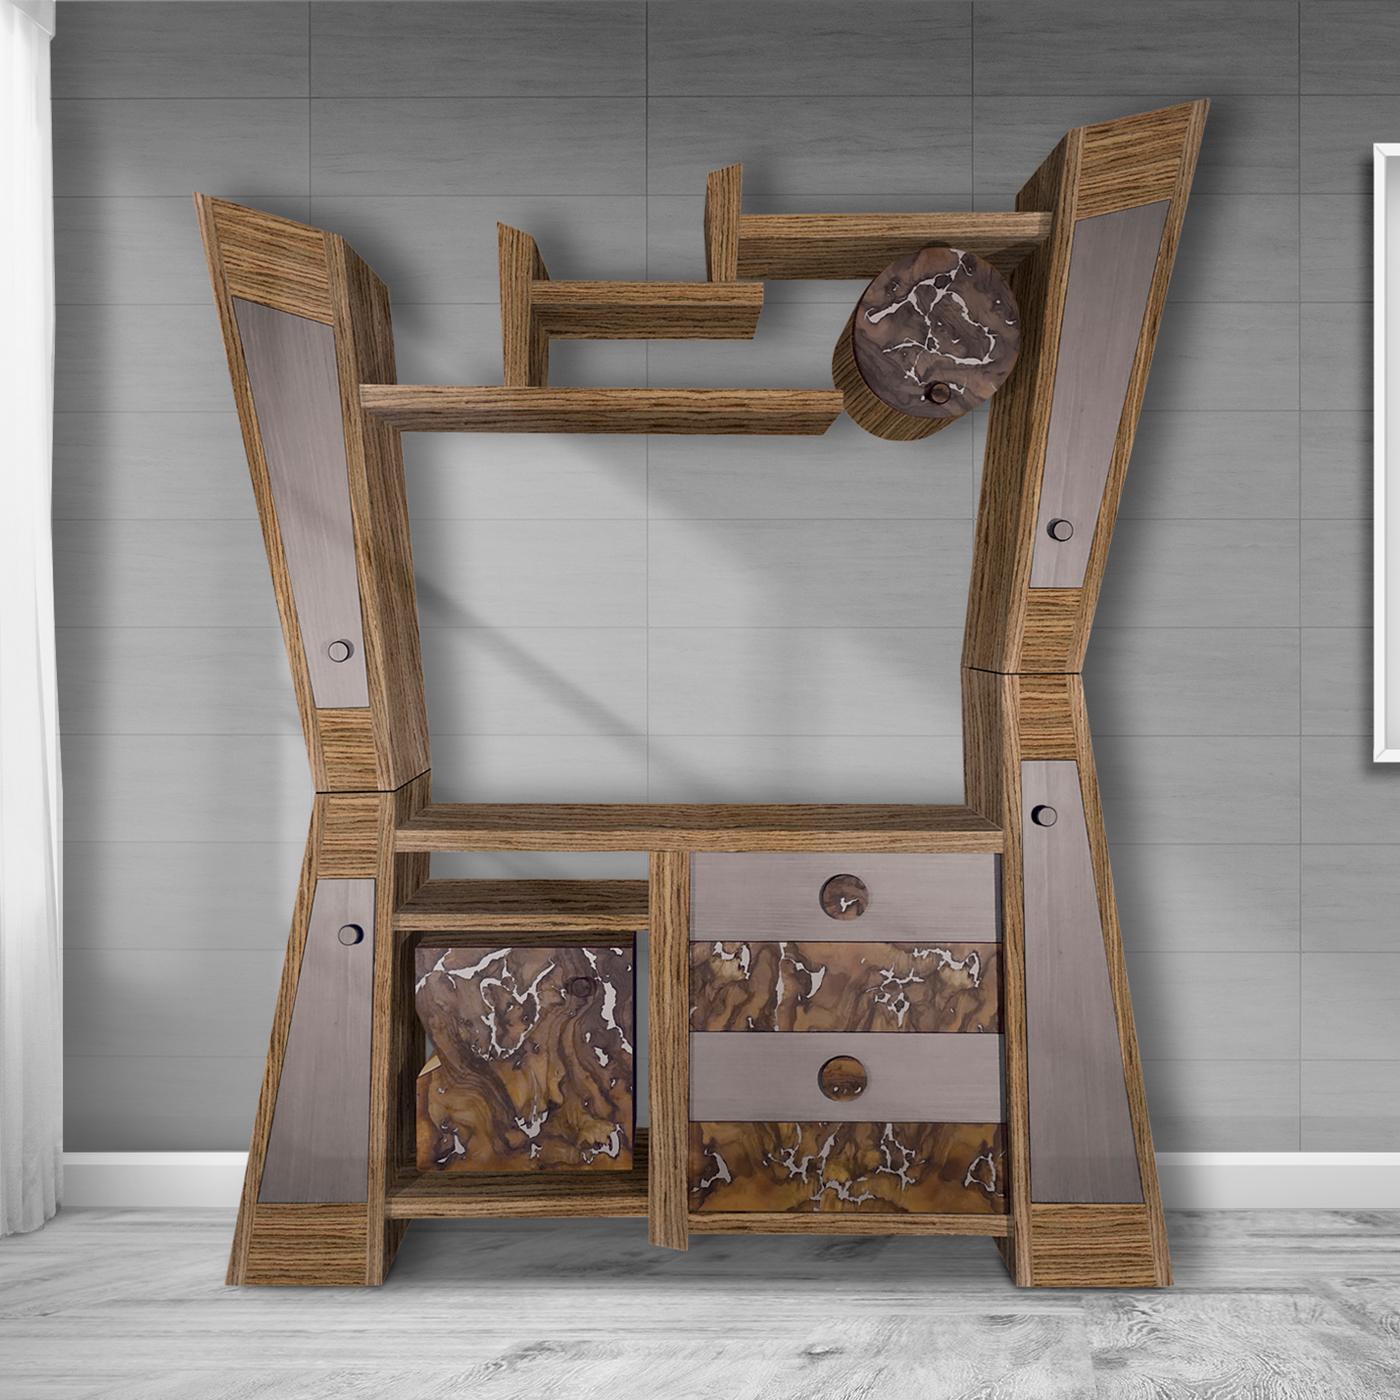 Holding a TV measuring at most 50 inches (112 x 65Hcm), this design is a cabinetmaking gem designed with eclecticism in mind. Solid wood and plywood partially veneered in gray wood and adorned with aluminum-inlaid walnut briar distinguishes its